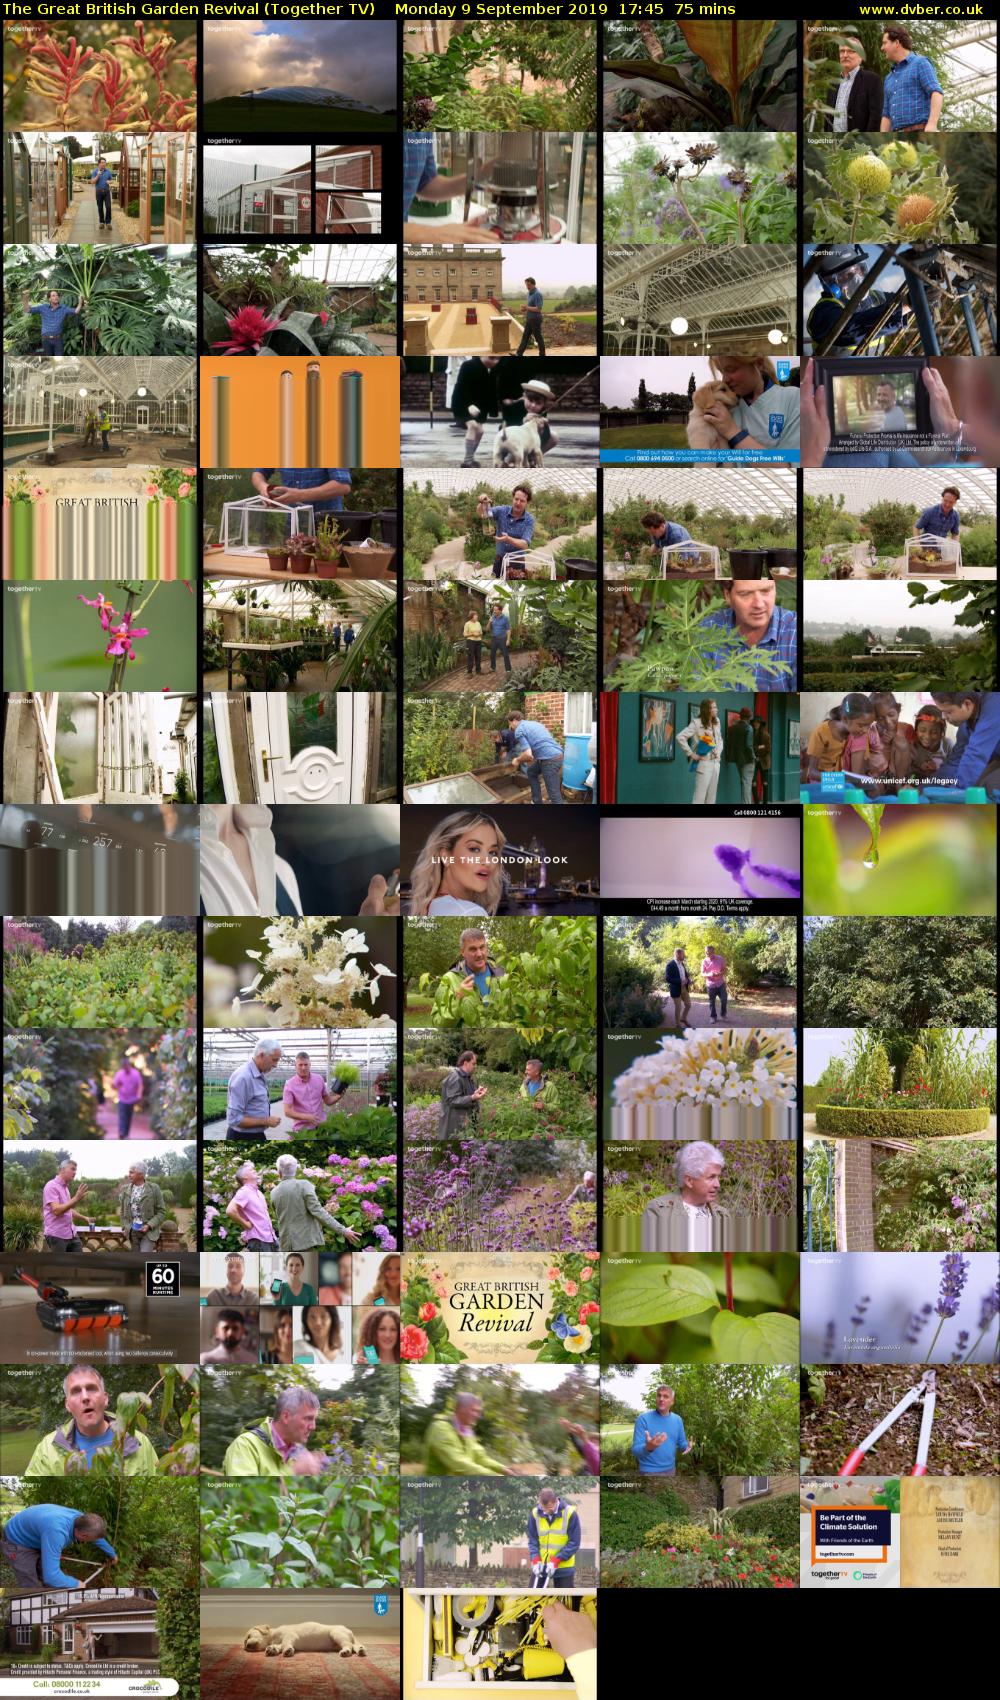 The Great British Garden Revival (Together TV) Monday 9 September 2019 17:45 - 19:00